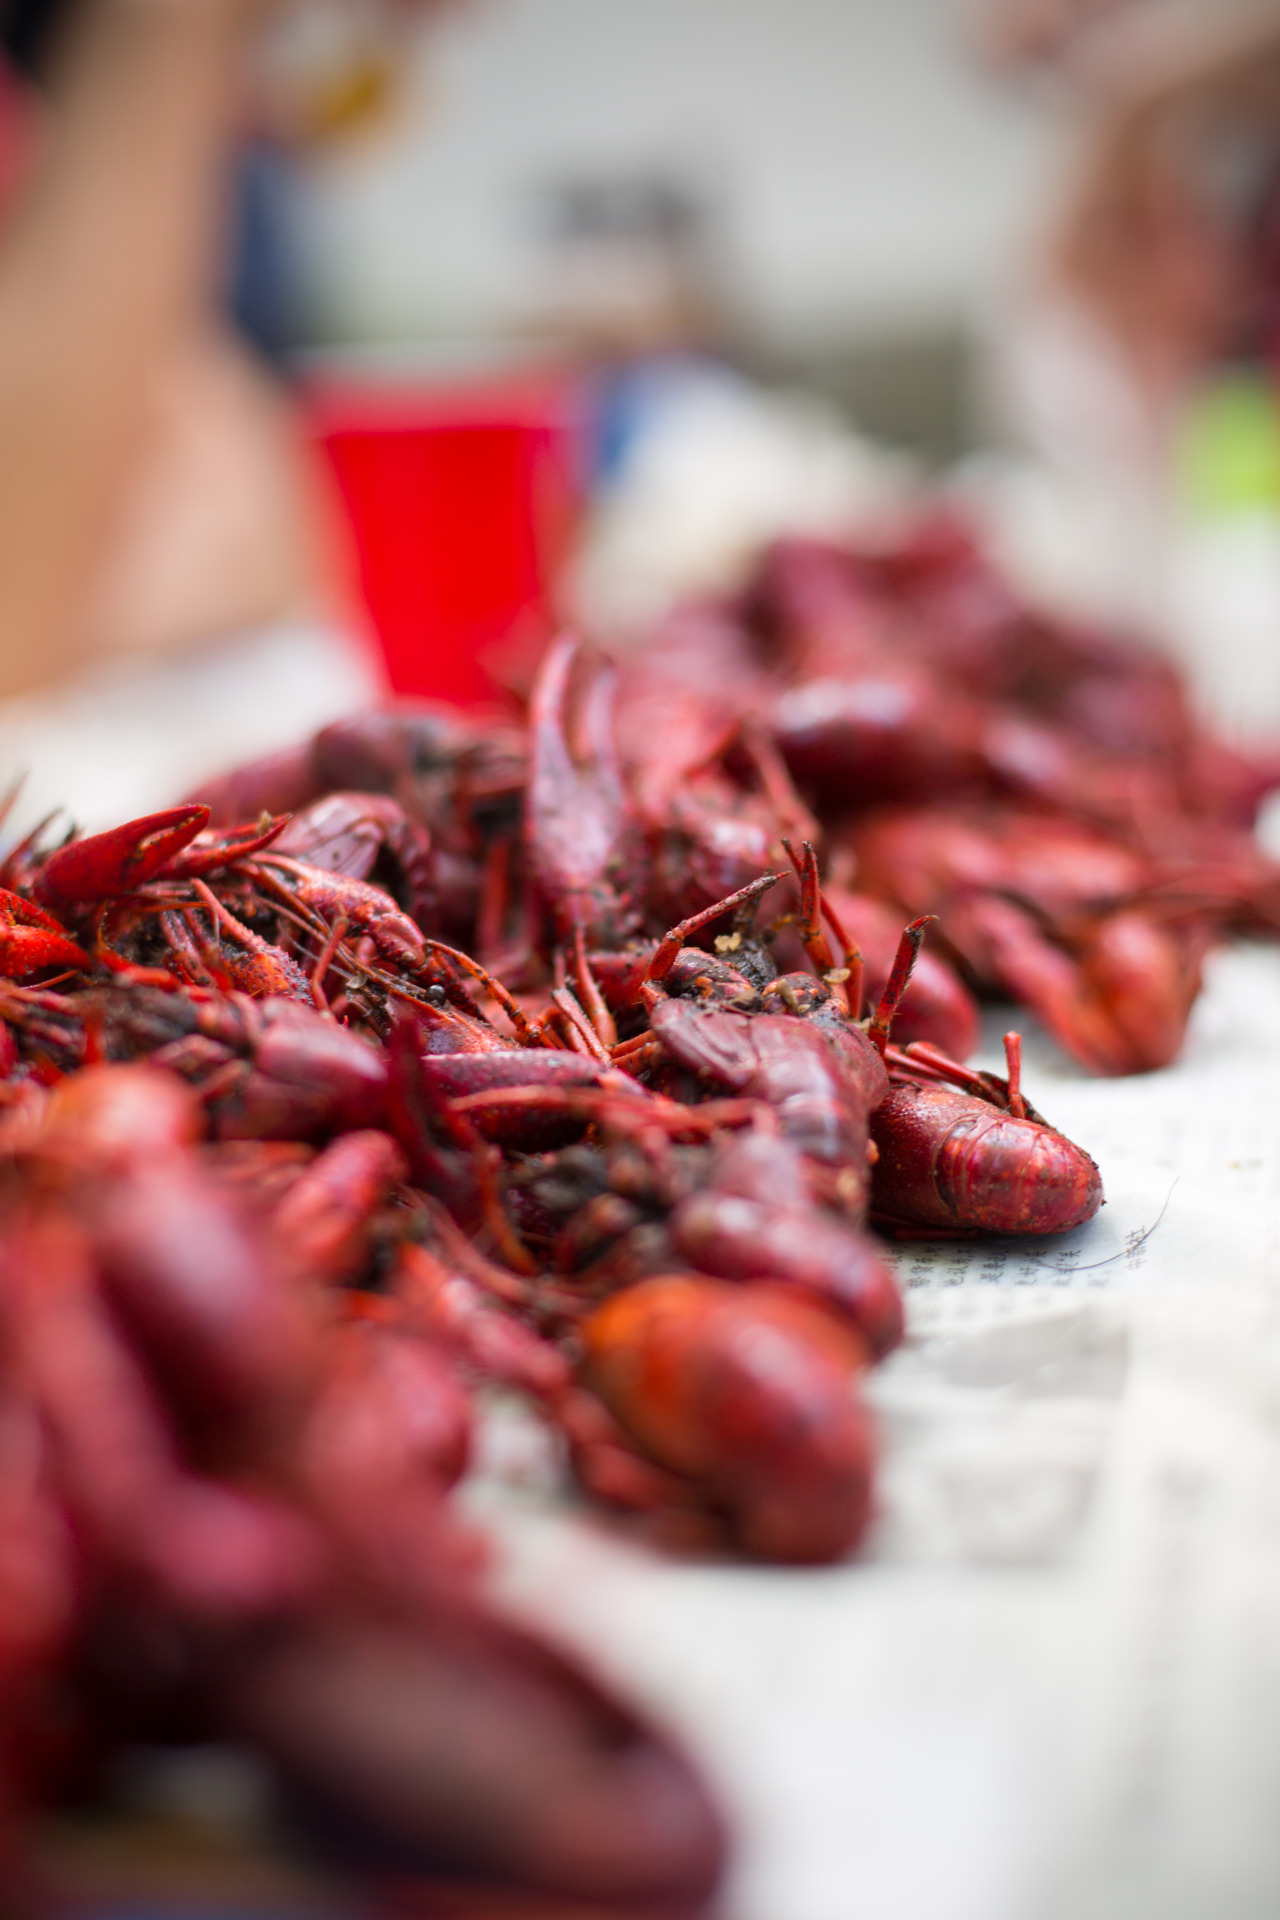 Sichuan Crawfish BoilHosted by the lovely Mike Lee and Danielle GouldWatch out for the KUNG POW POTATOES!